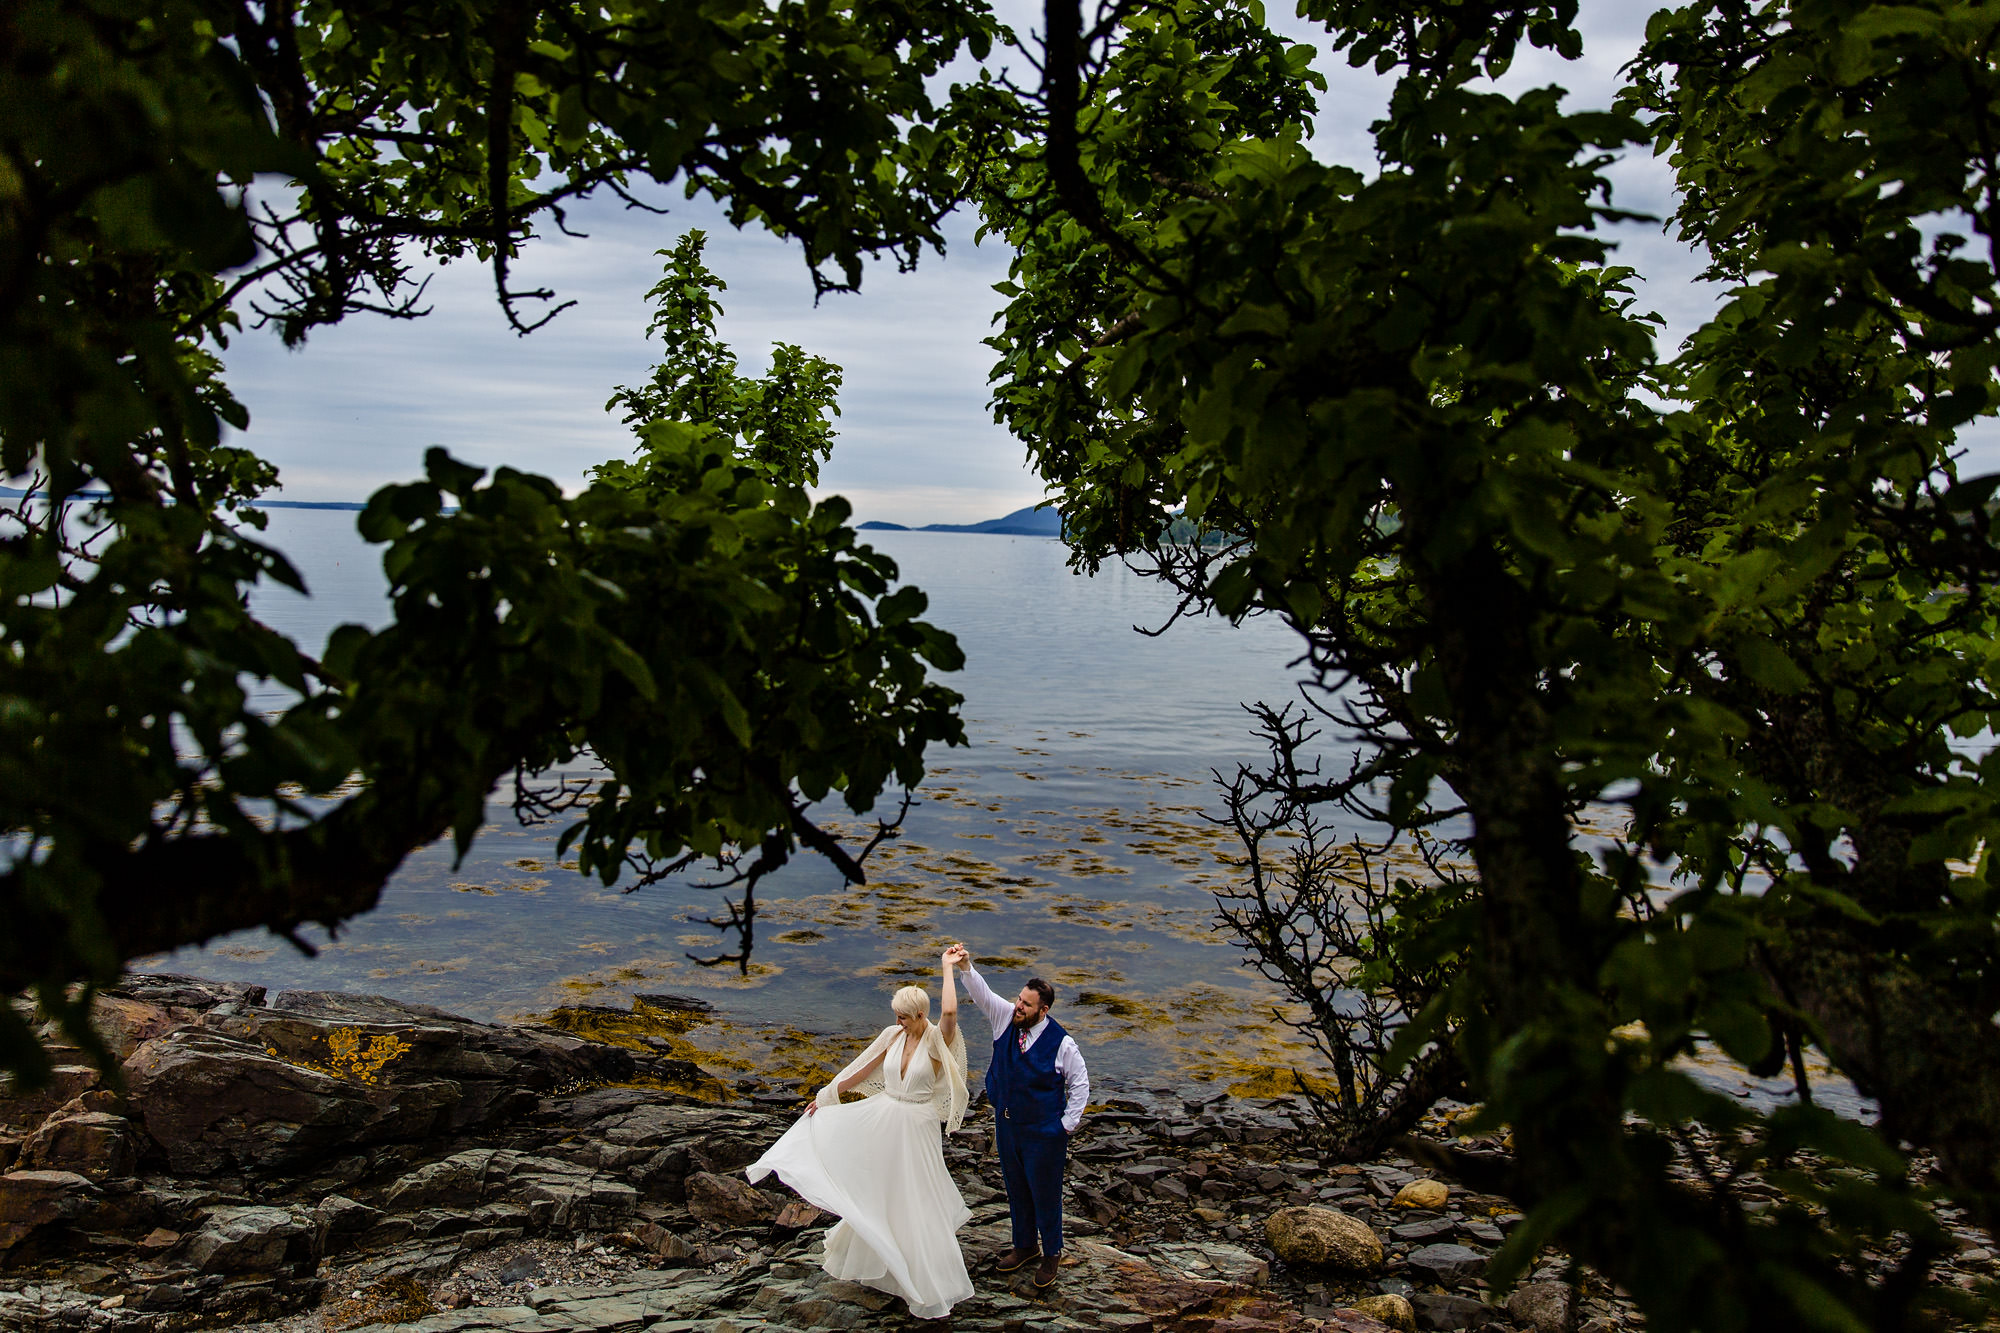 A Hancock Maine wedding at a private residence